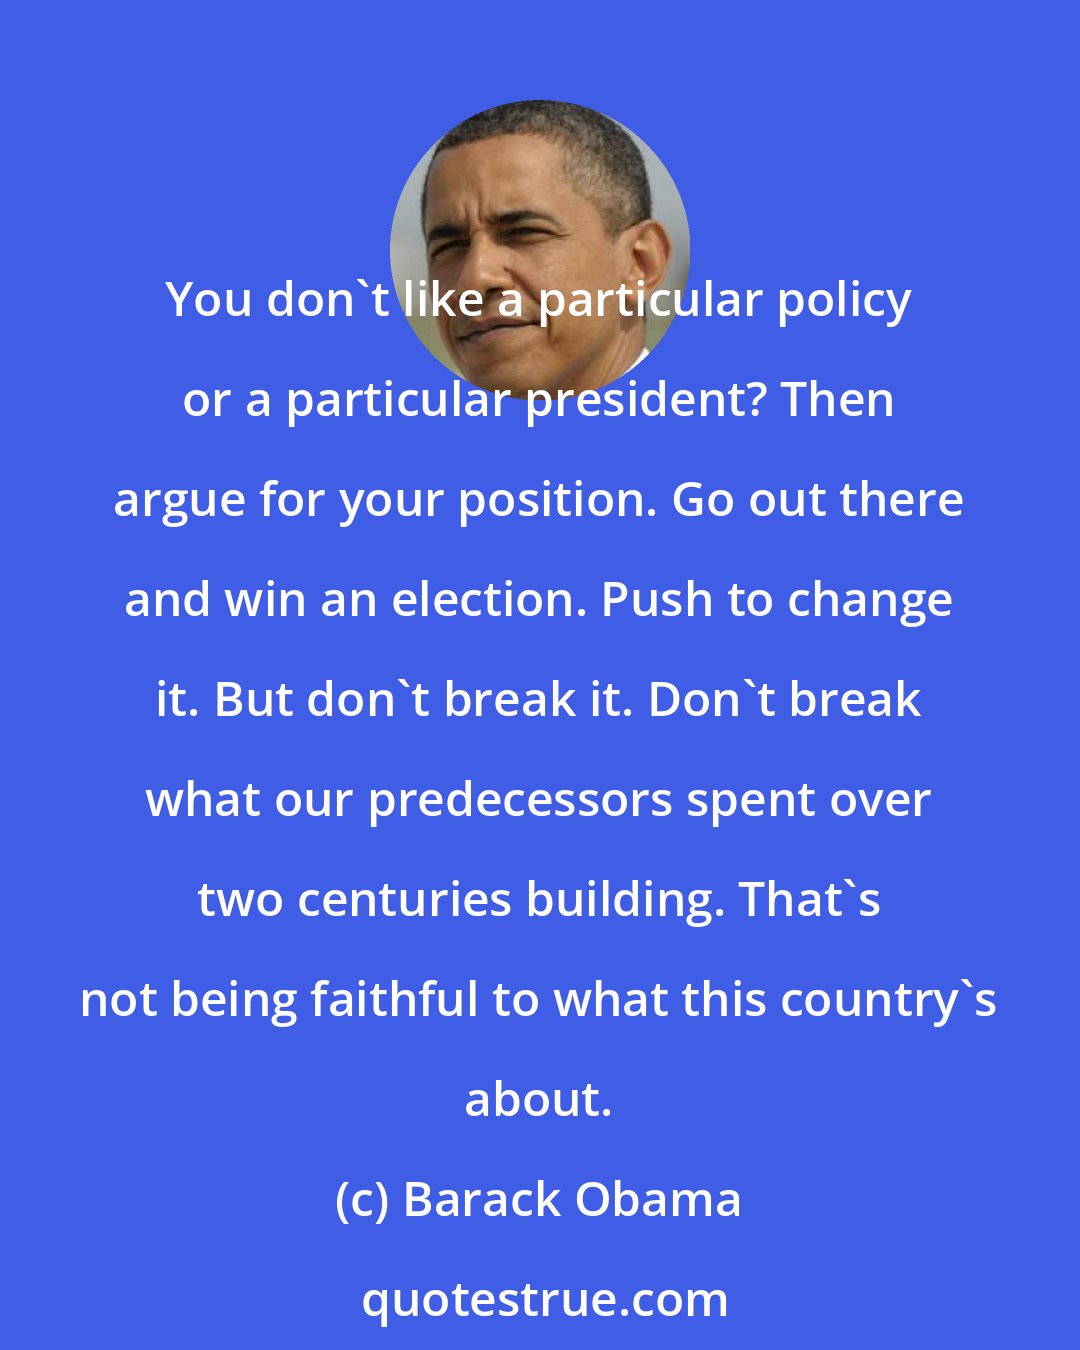 Barack Obama: You don't like a particular policy or a particular president? Then argue for your position. Go out there and win an election. Push to change it. But don't break it. Don't break what our predecessors spent over two centuries building. That's not being faithful to what this country's about.